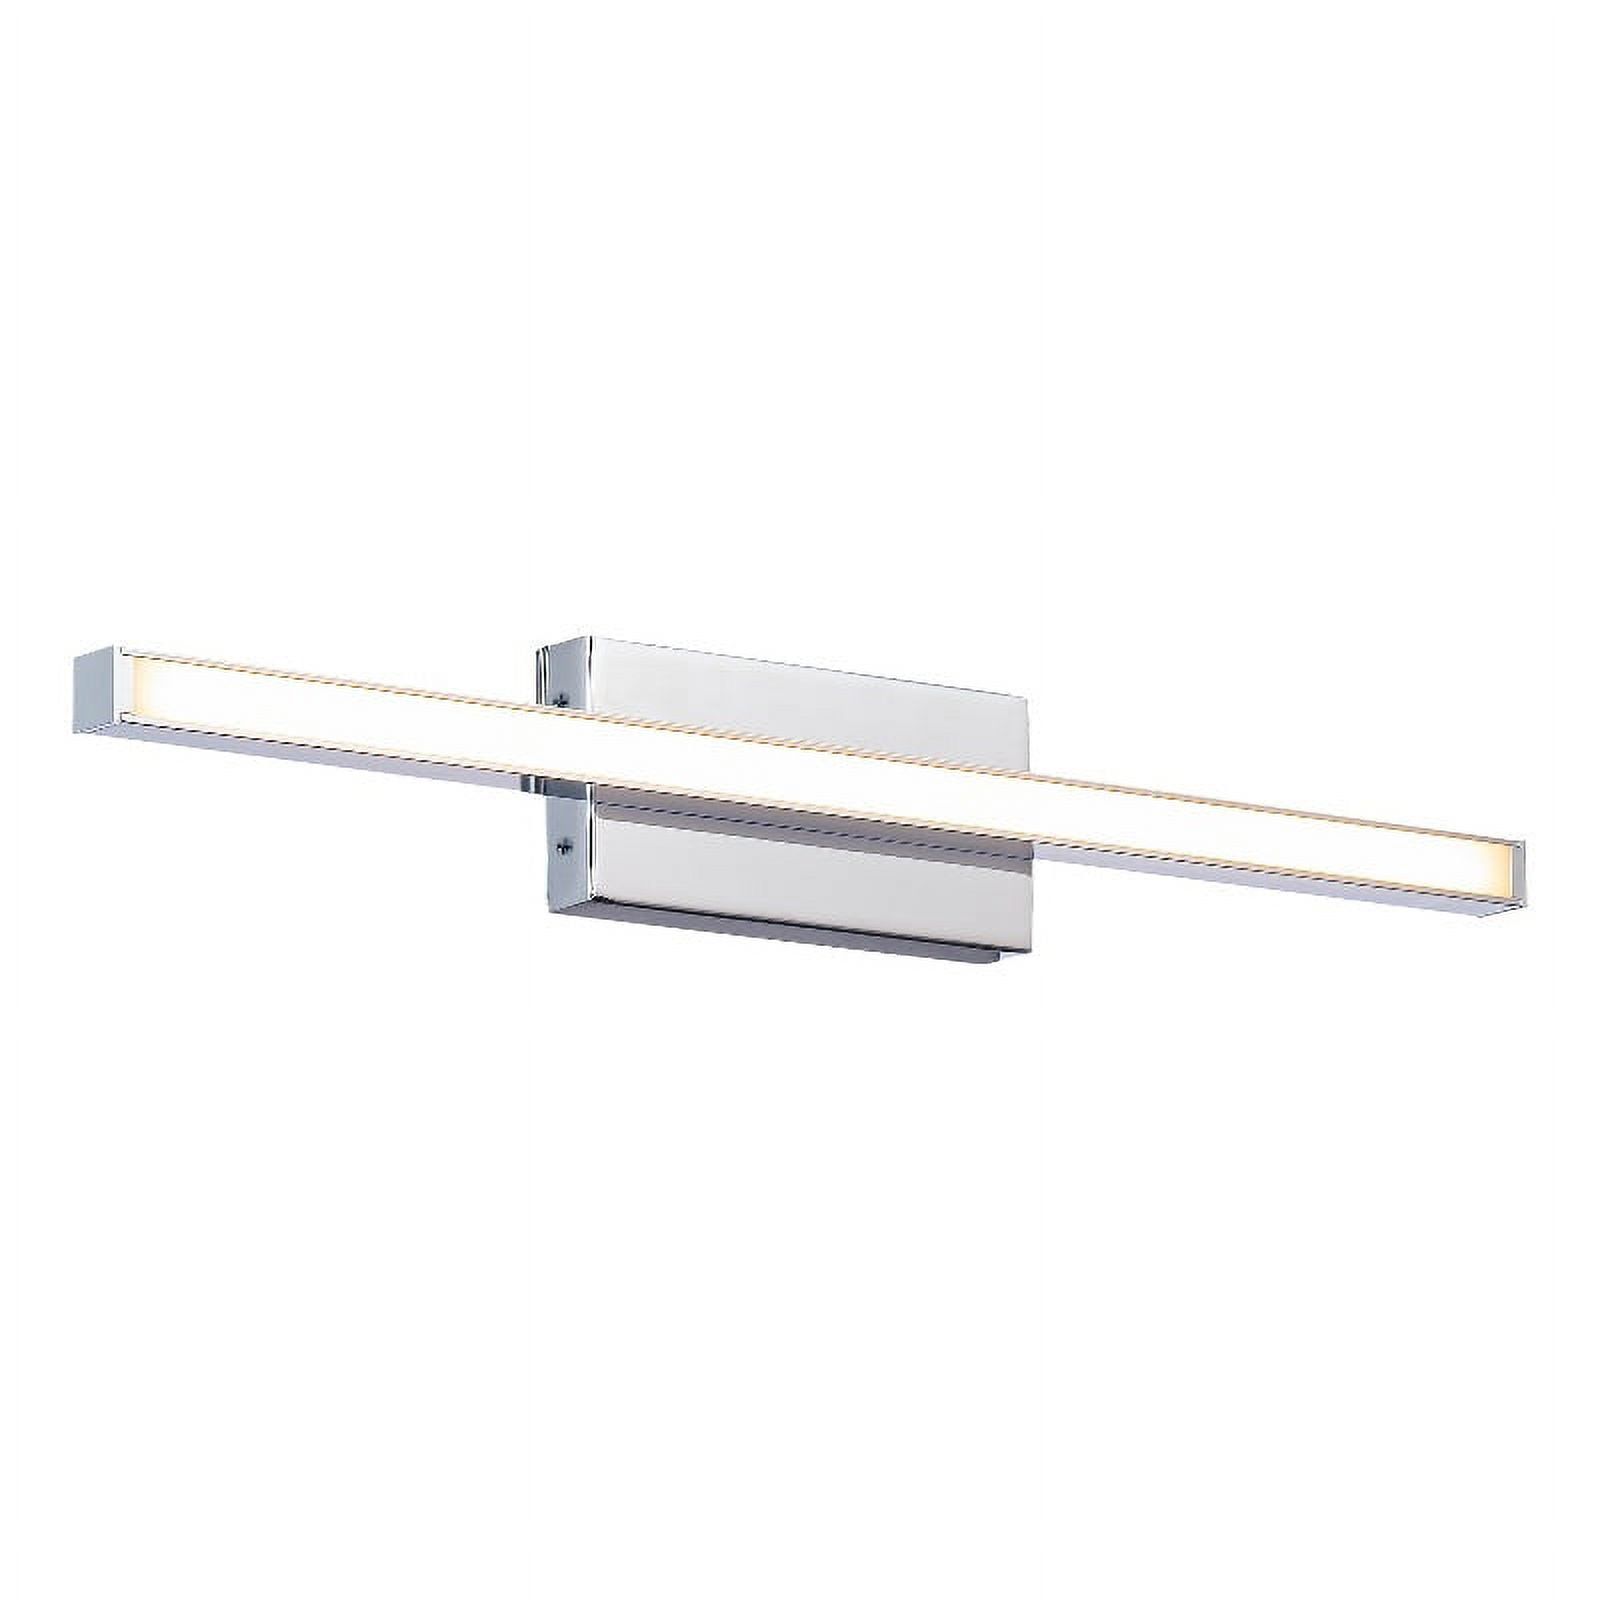 Sleek Chrome LED Wall Sconce with White Acrylic Shade, Dimmable 18"